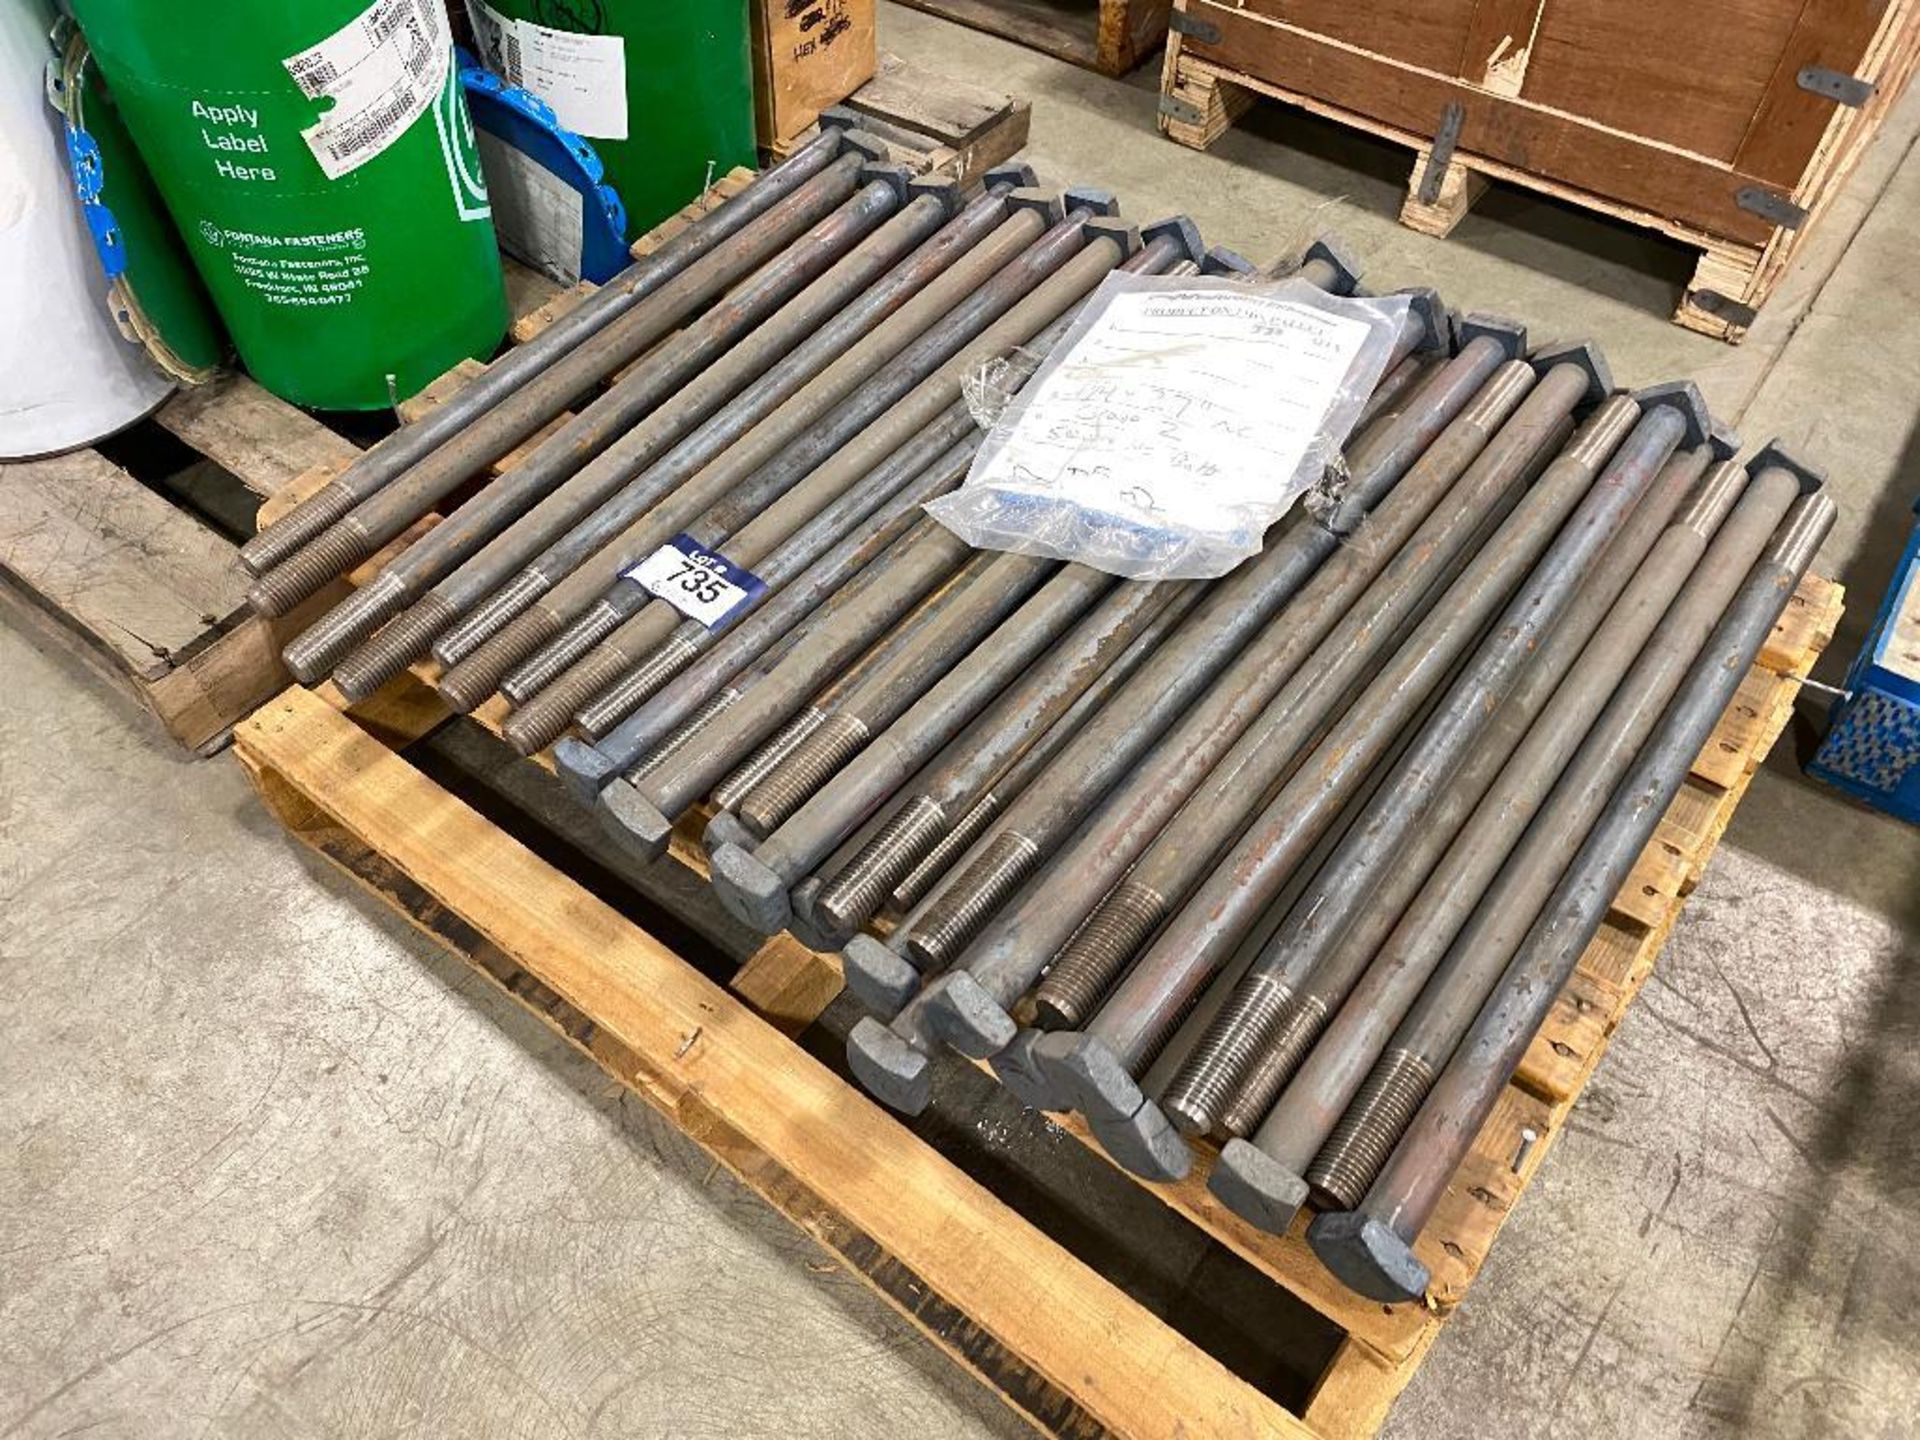 Pallet of 1-1/4" x 27" Grade 2 Square Heavy Duty Bolts - Image 2 of 3